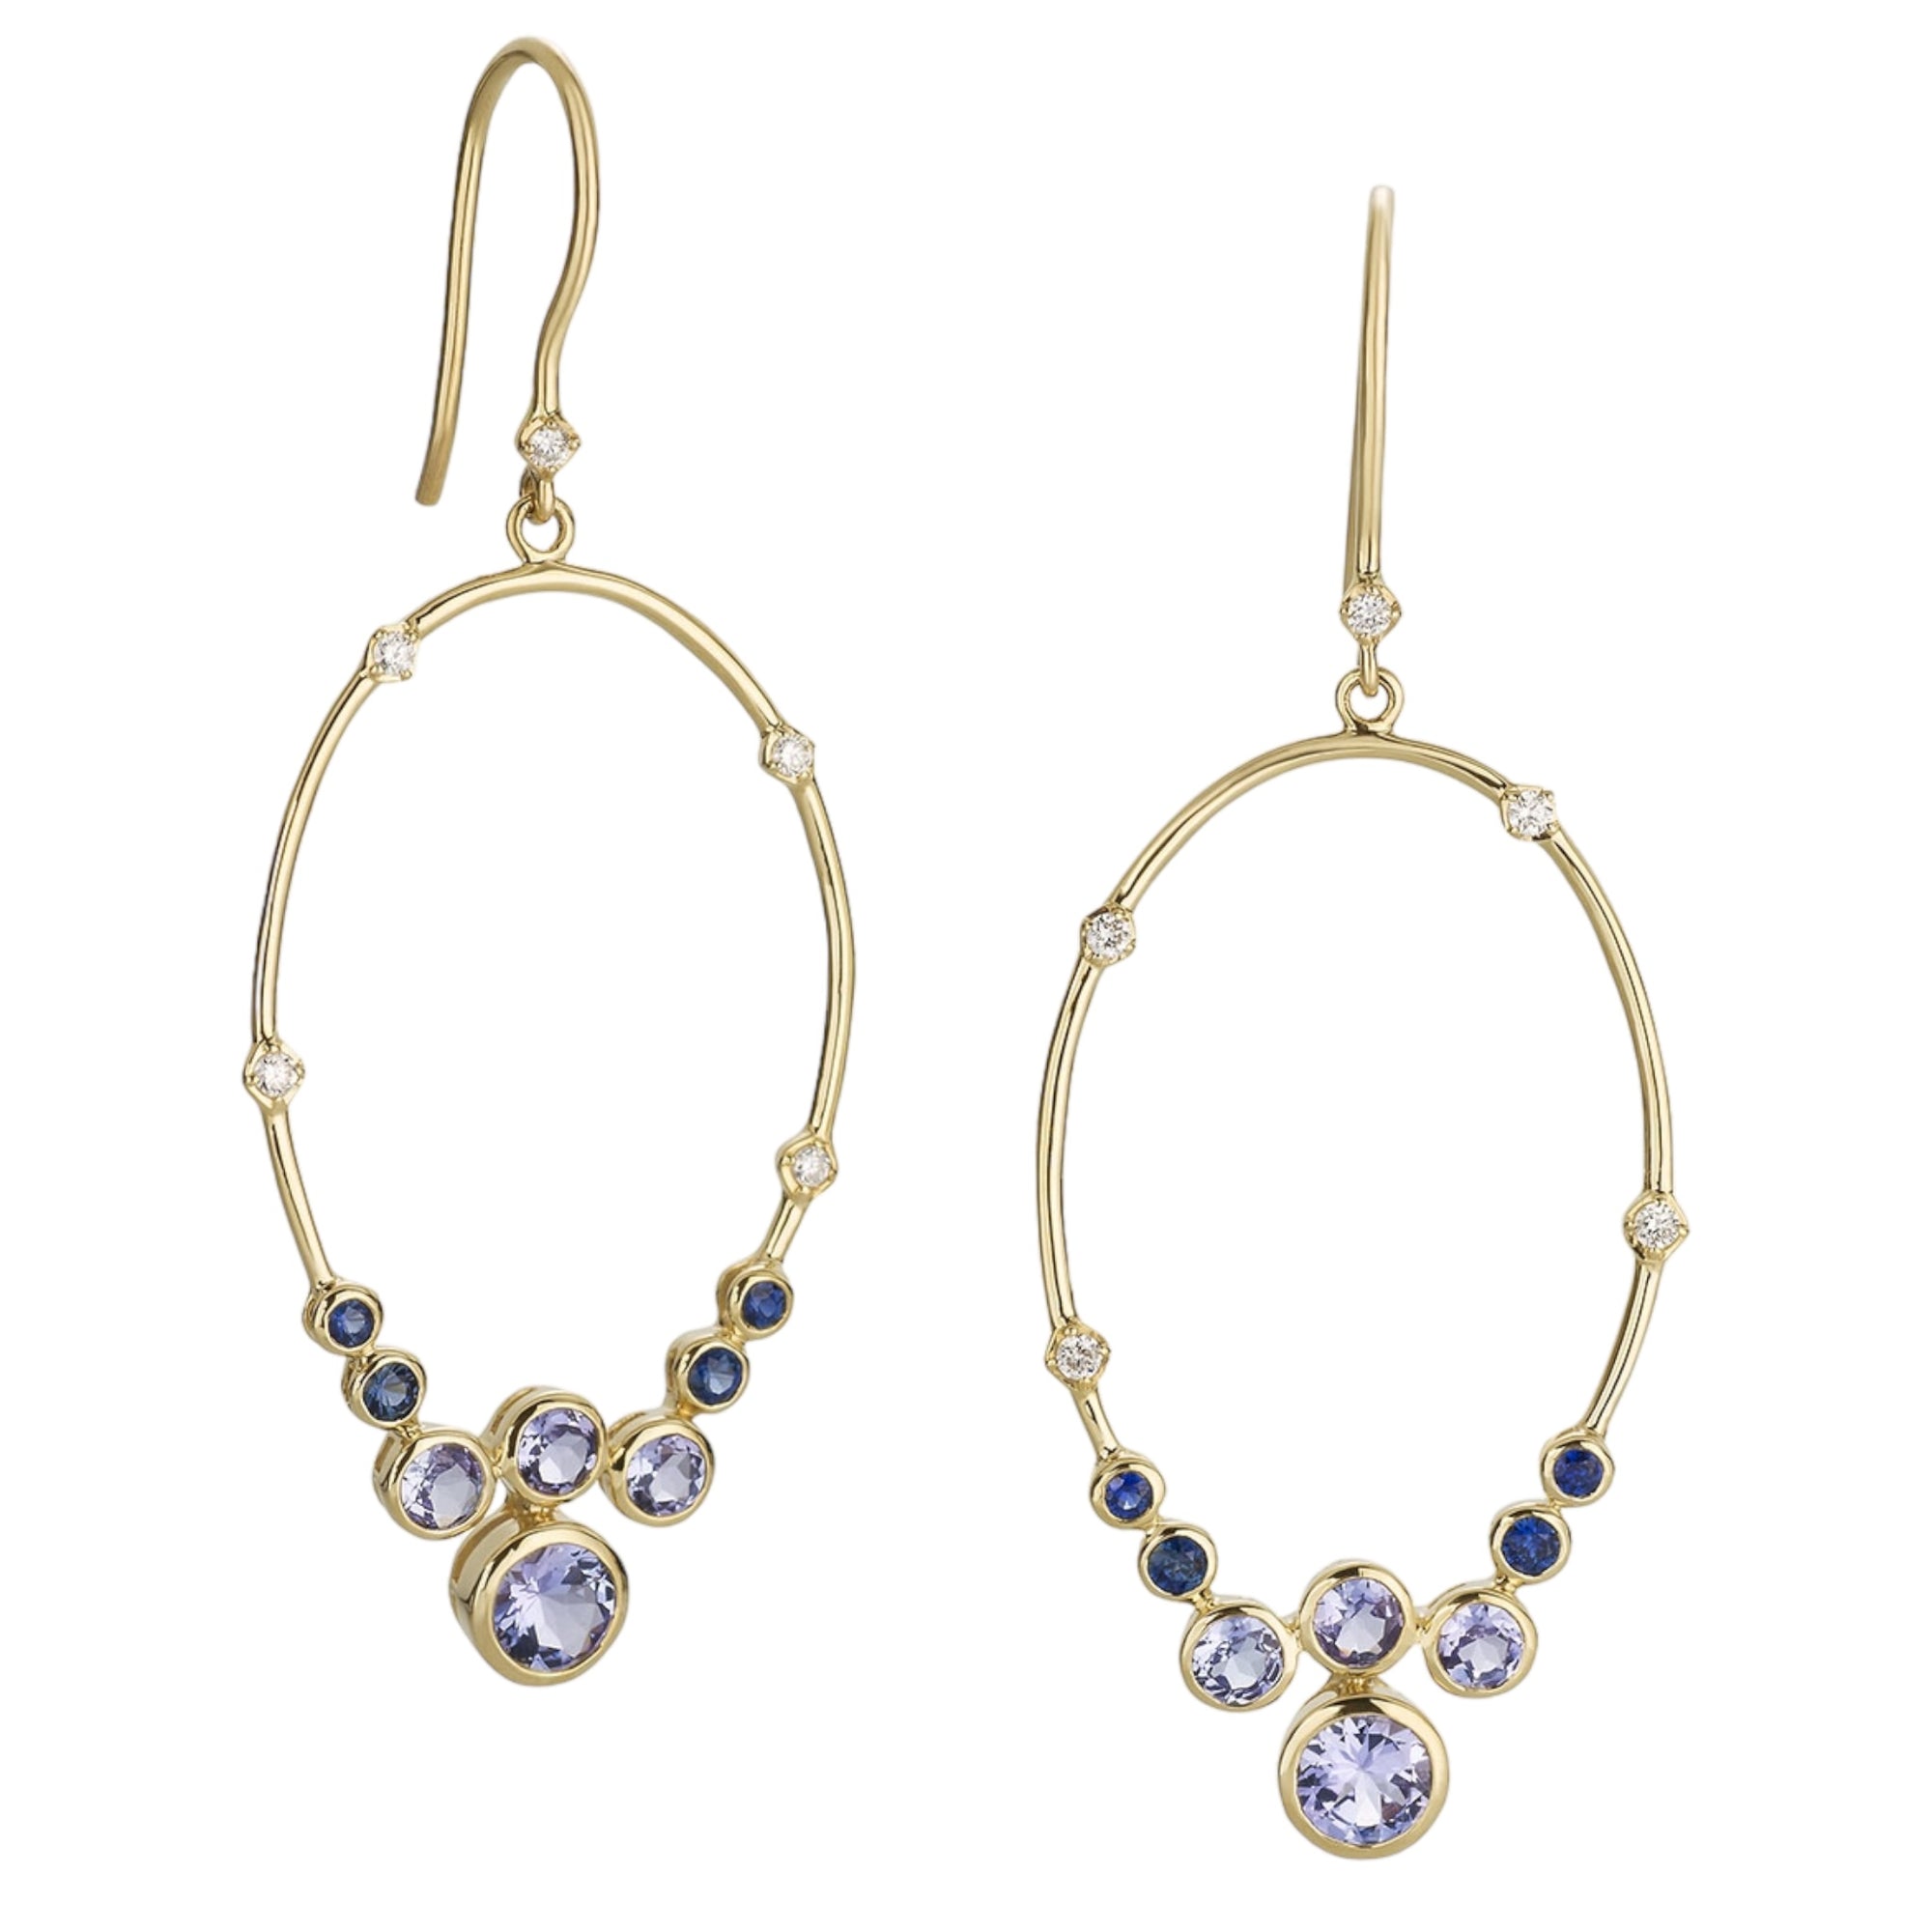 Blue Constellation Hoop Earrings by Martha Seely available at Talisman Collection Fine Jewelers in El Dorado Hills, CA and online. Stats: Lightweight 14k hoop earrings with bezel-set clusters of 1.51 ct tanzanites, 0.26ct sapphires and 0.14ct of diamonds that make you feel like a star. Not too big. Not too small. Just right. 